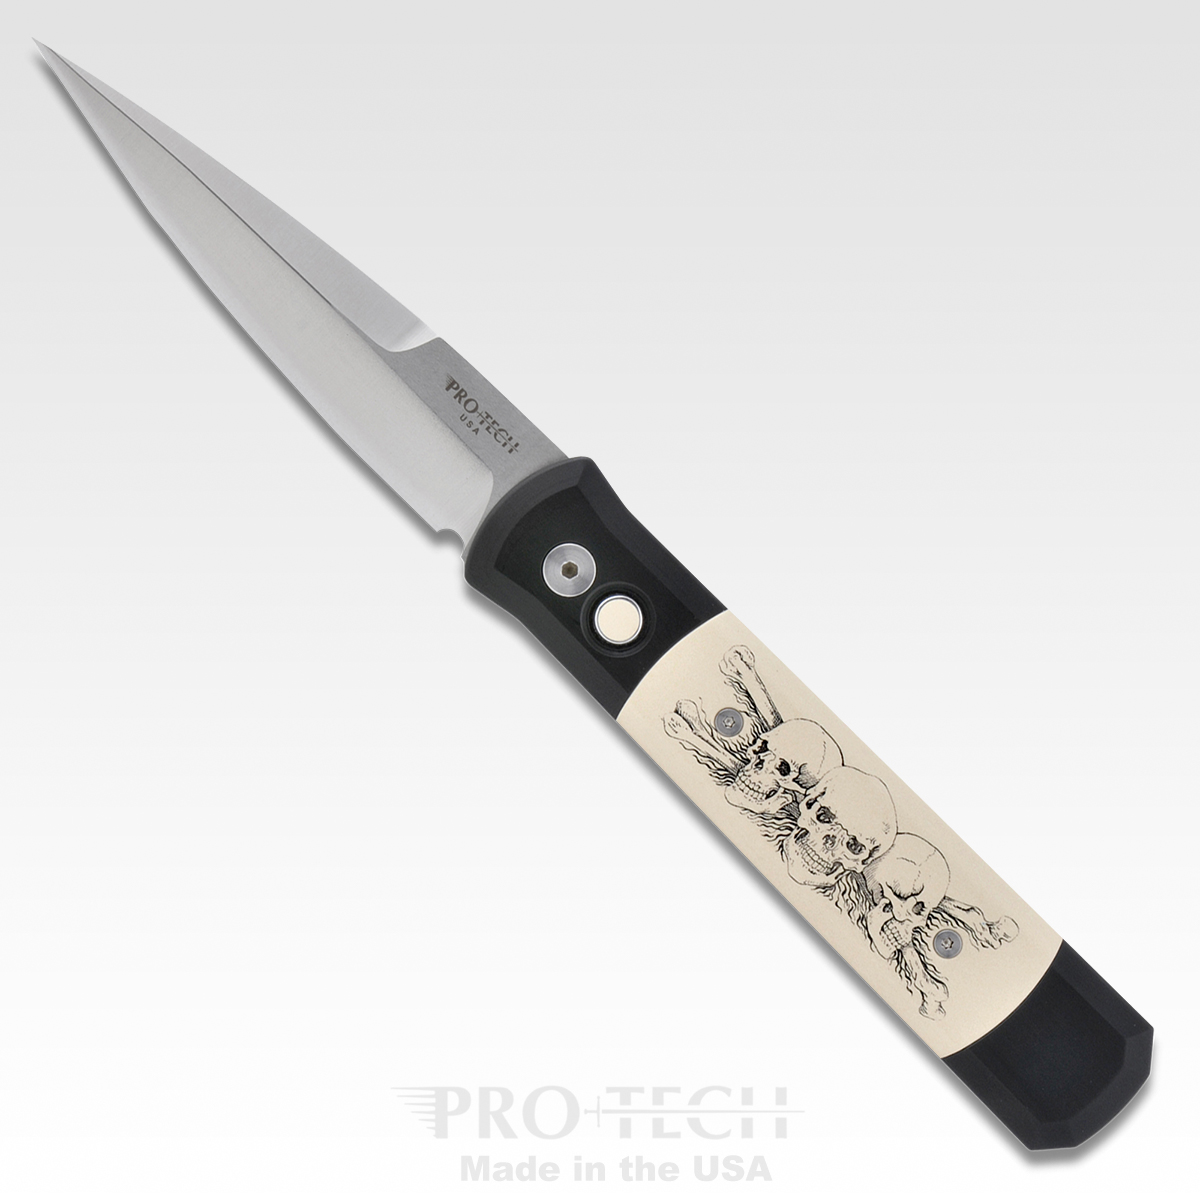 Tekto Gear Amber Automatic Knife review - The Gadgeteer